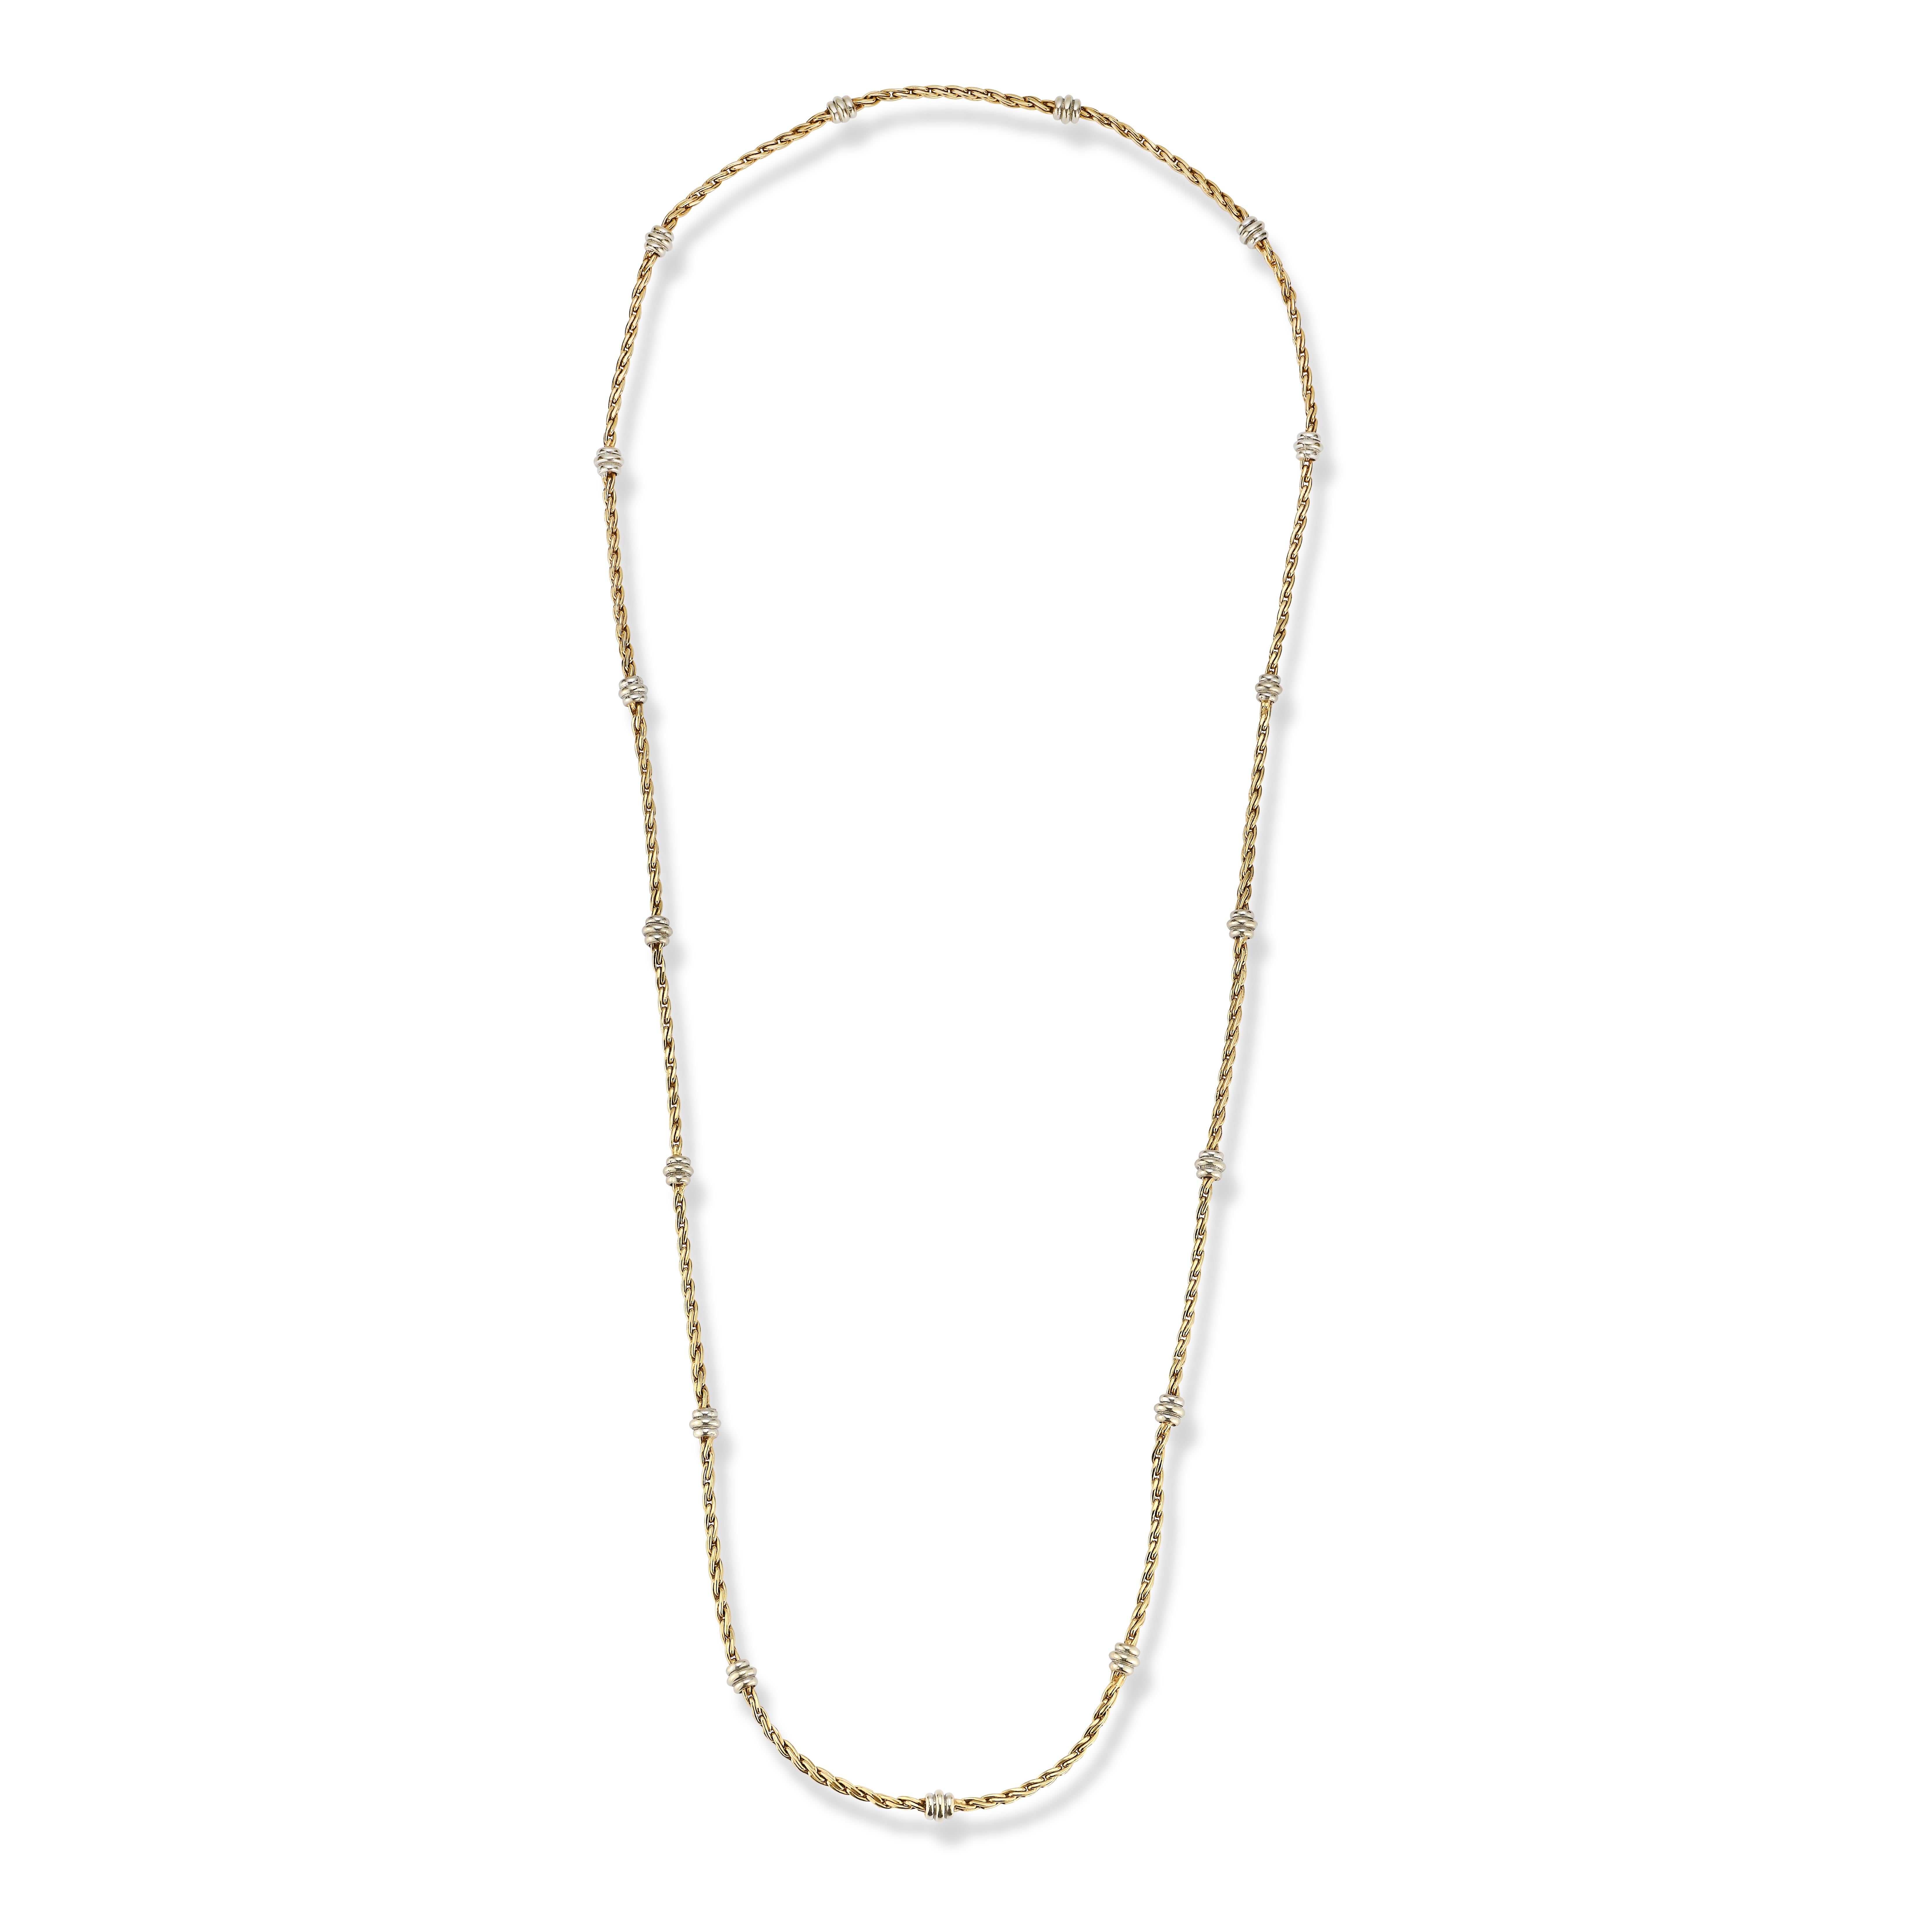 Cartier Two Tone Gold Necklace

A two tone gold necklace with 17 white gold knots evenly spaced throughout

Signed Cartier 

Length: 33